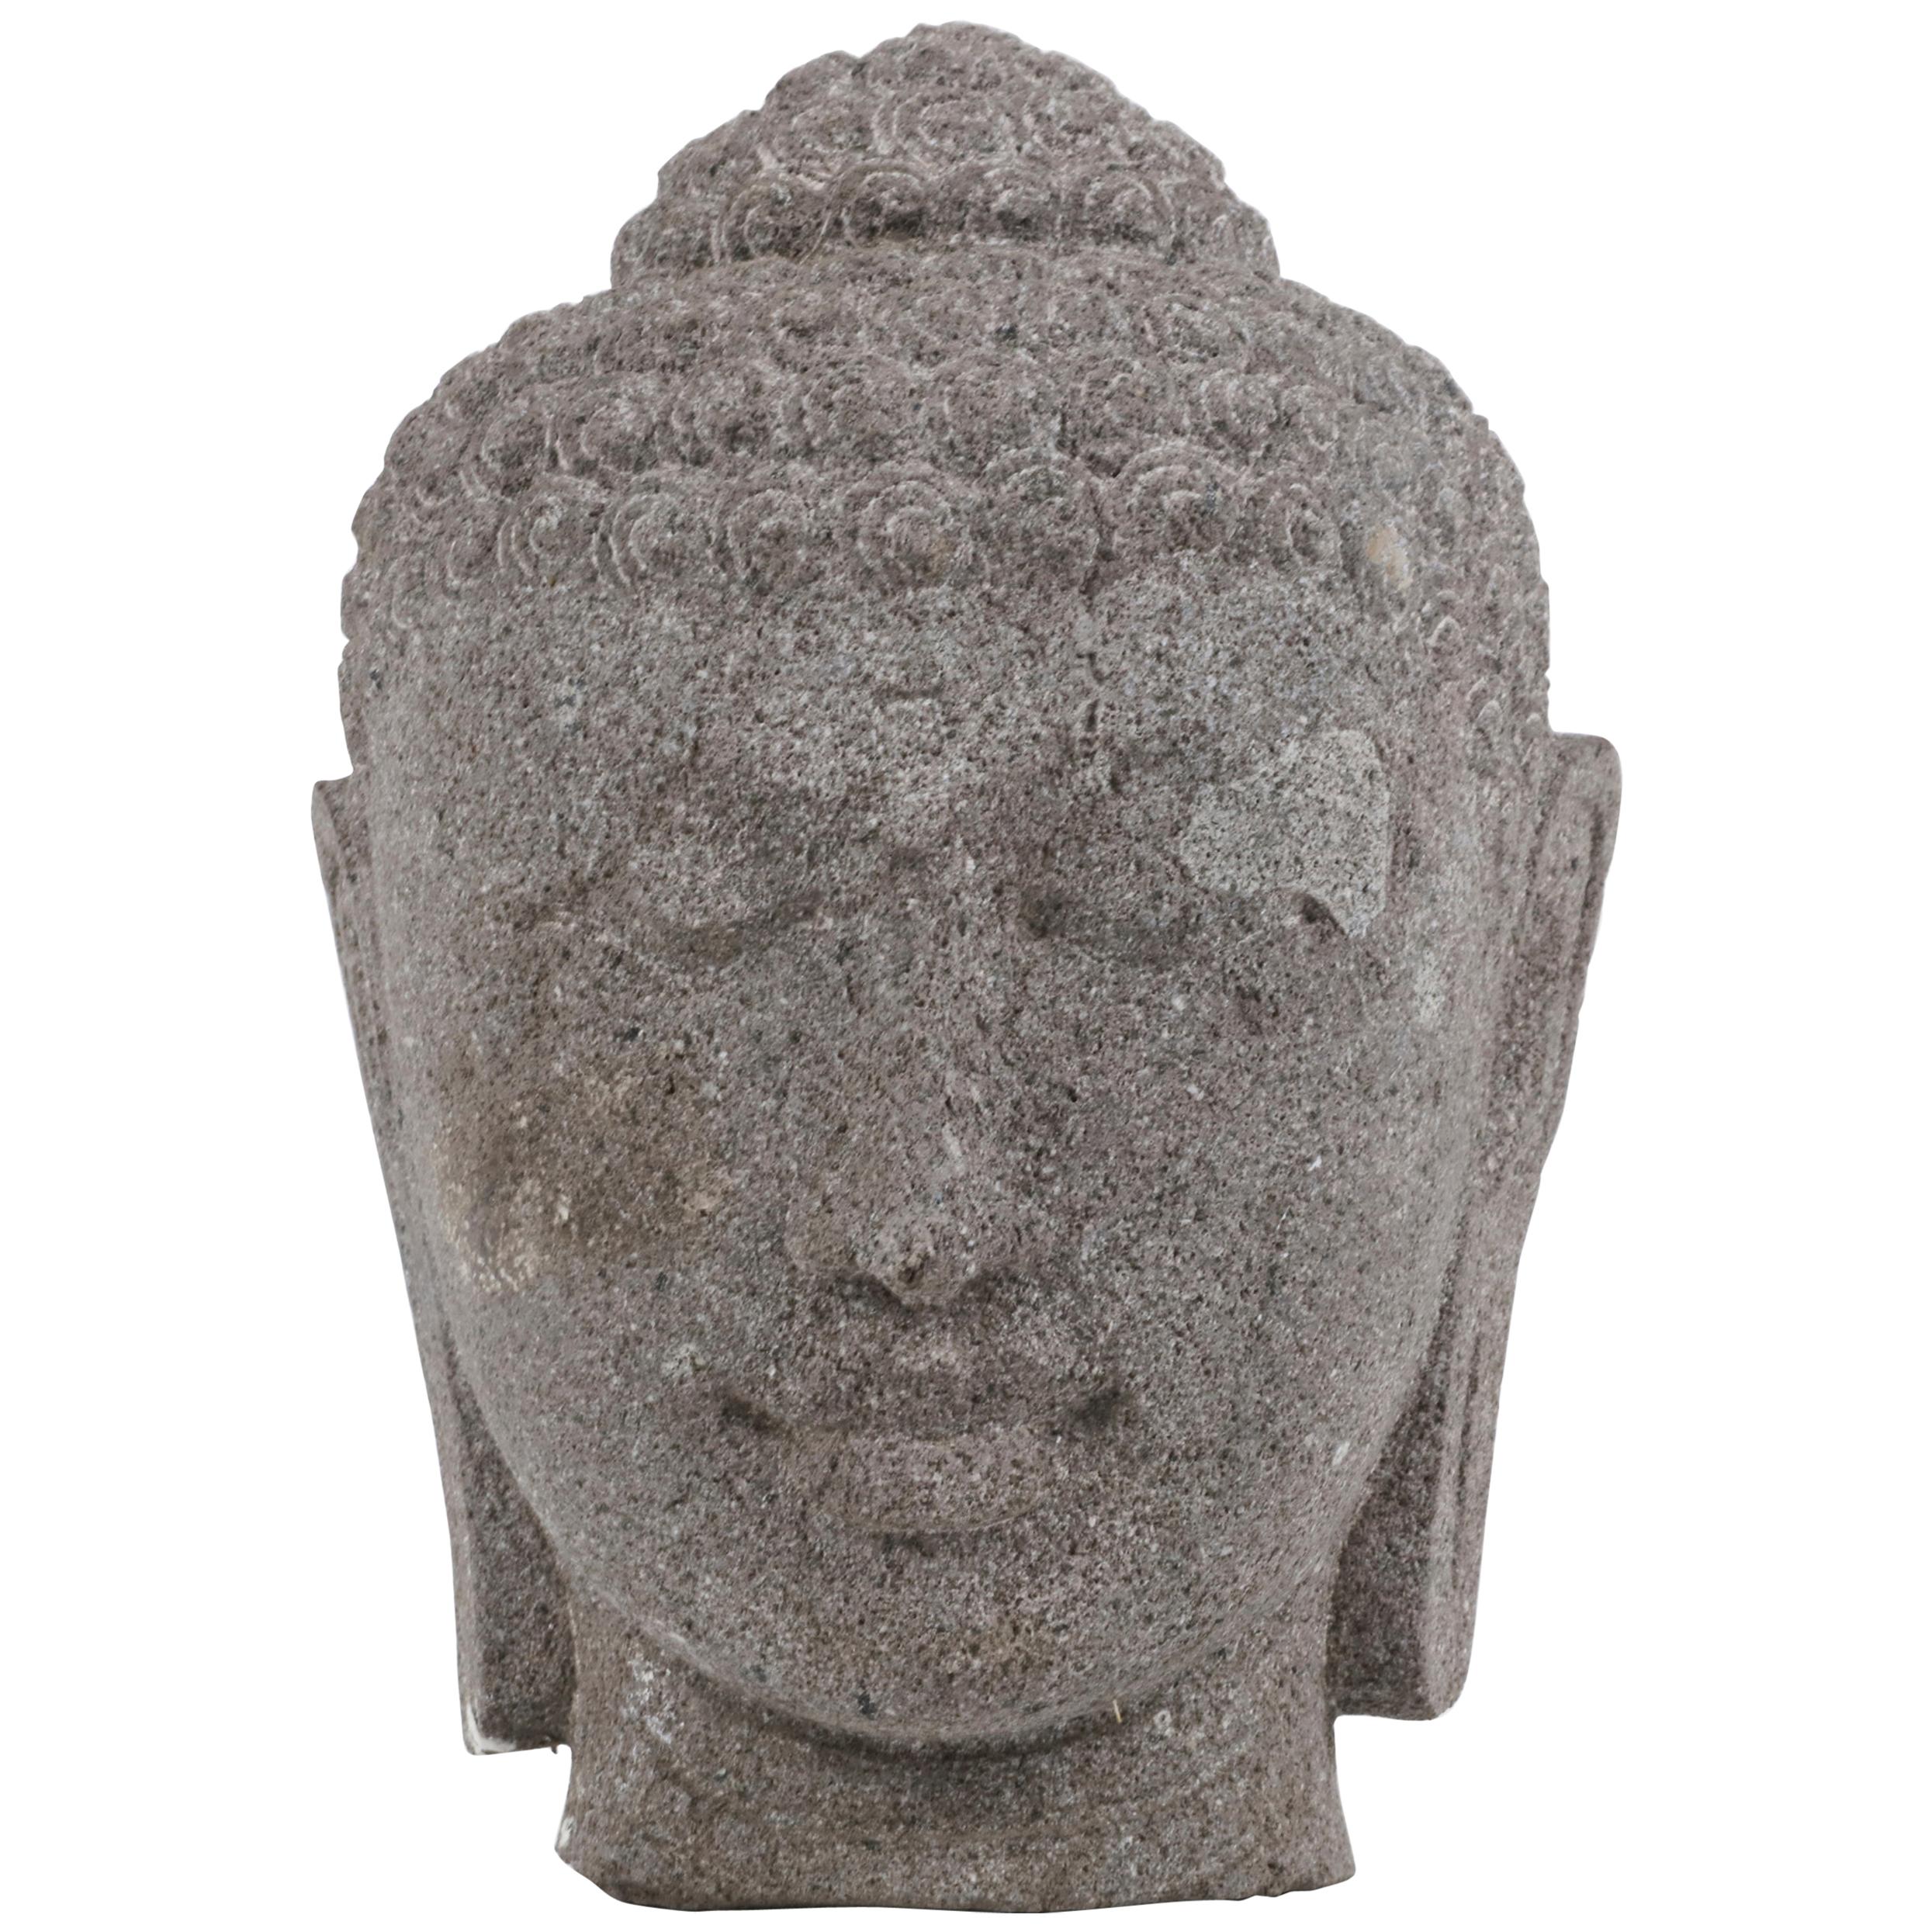 Buddha Head Statue Hand Carved from River Boulder